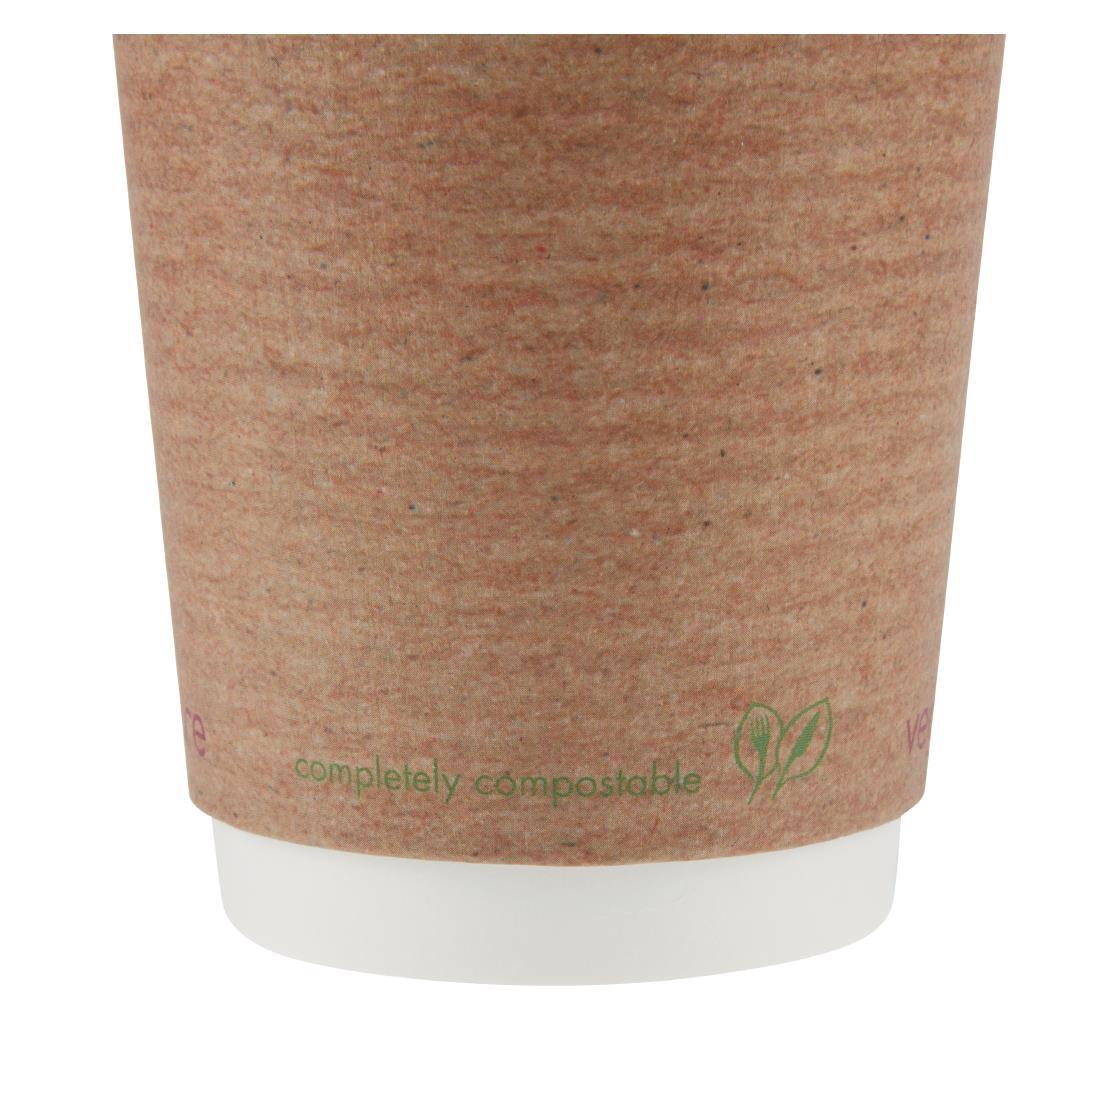 Vegware Compostable Coffee Cups Double Wall 340ml / 12oz (Pack of 500) - GH021  - 4